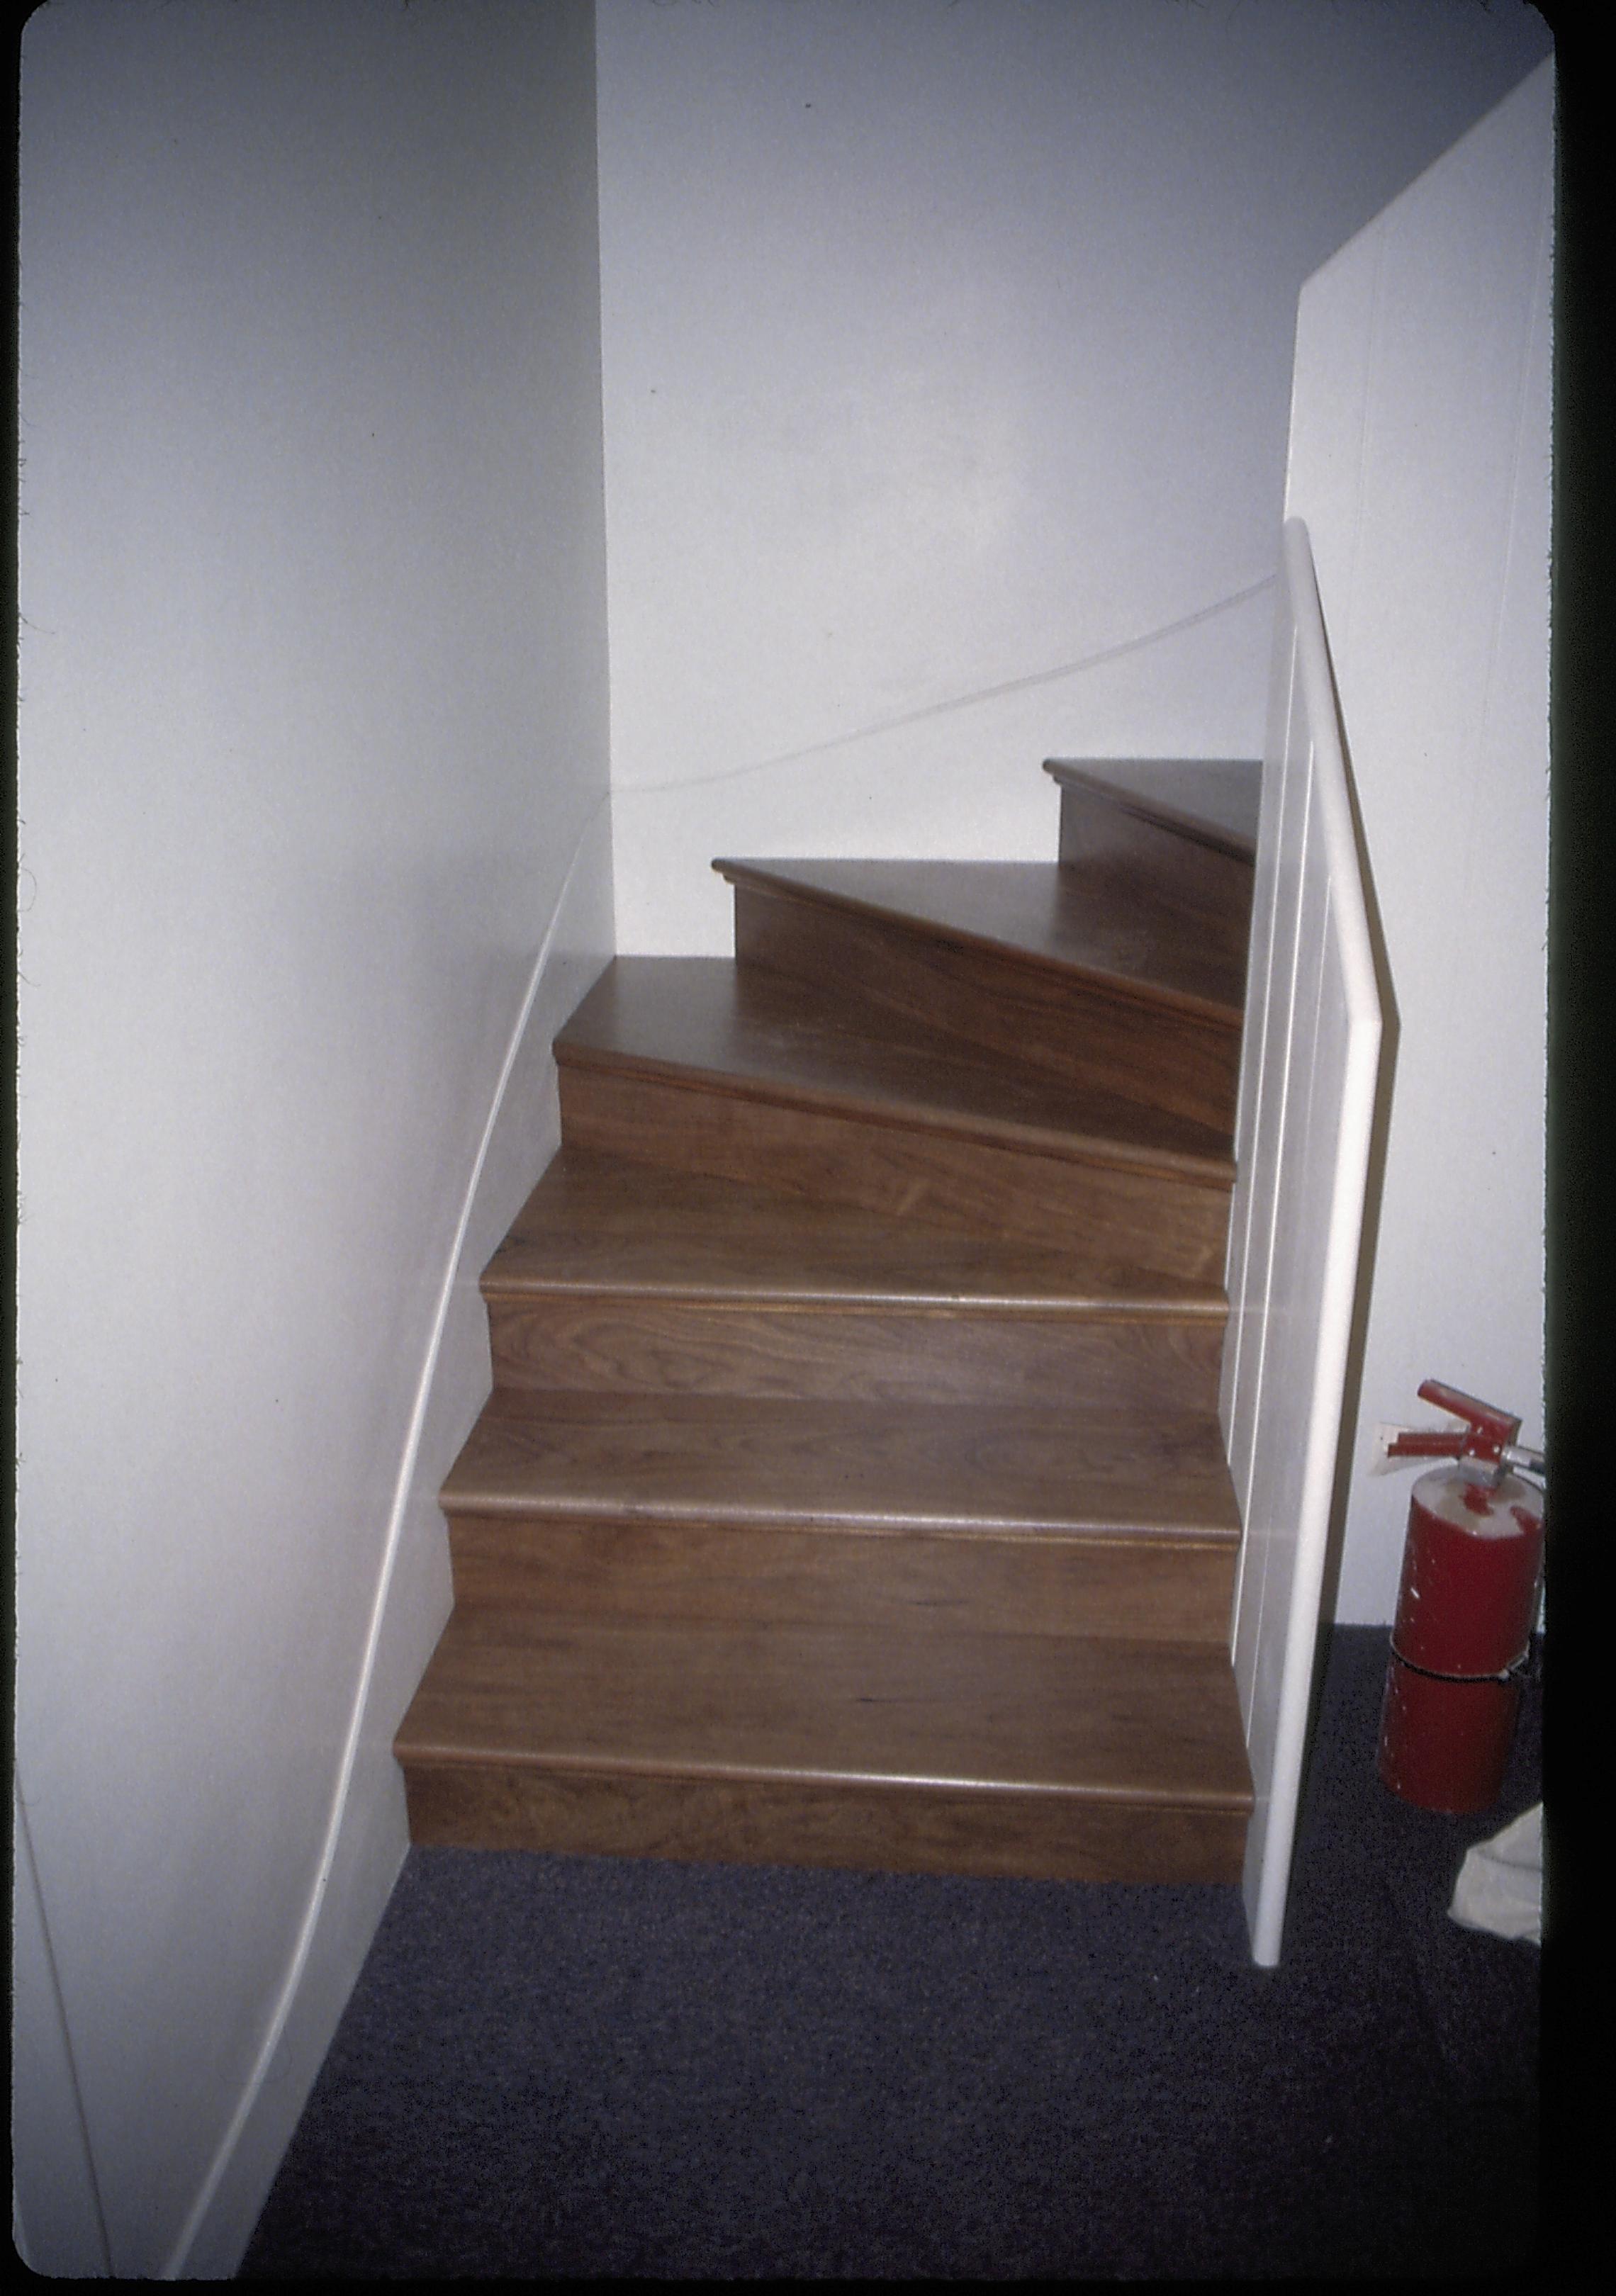 Stairs LIHO NHS- Arnold House Exhibit, #18 Slides, exp 20 Arnold House, exhibit